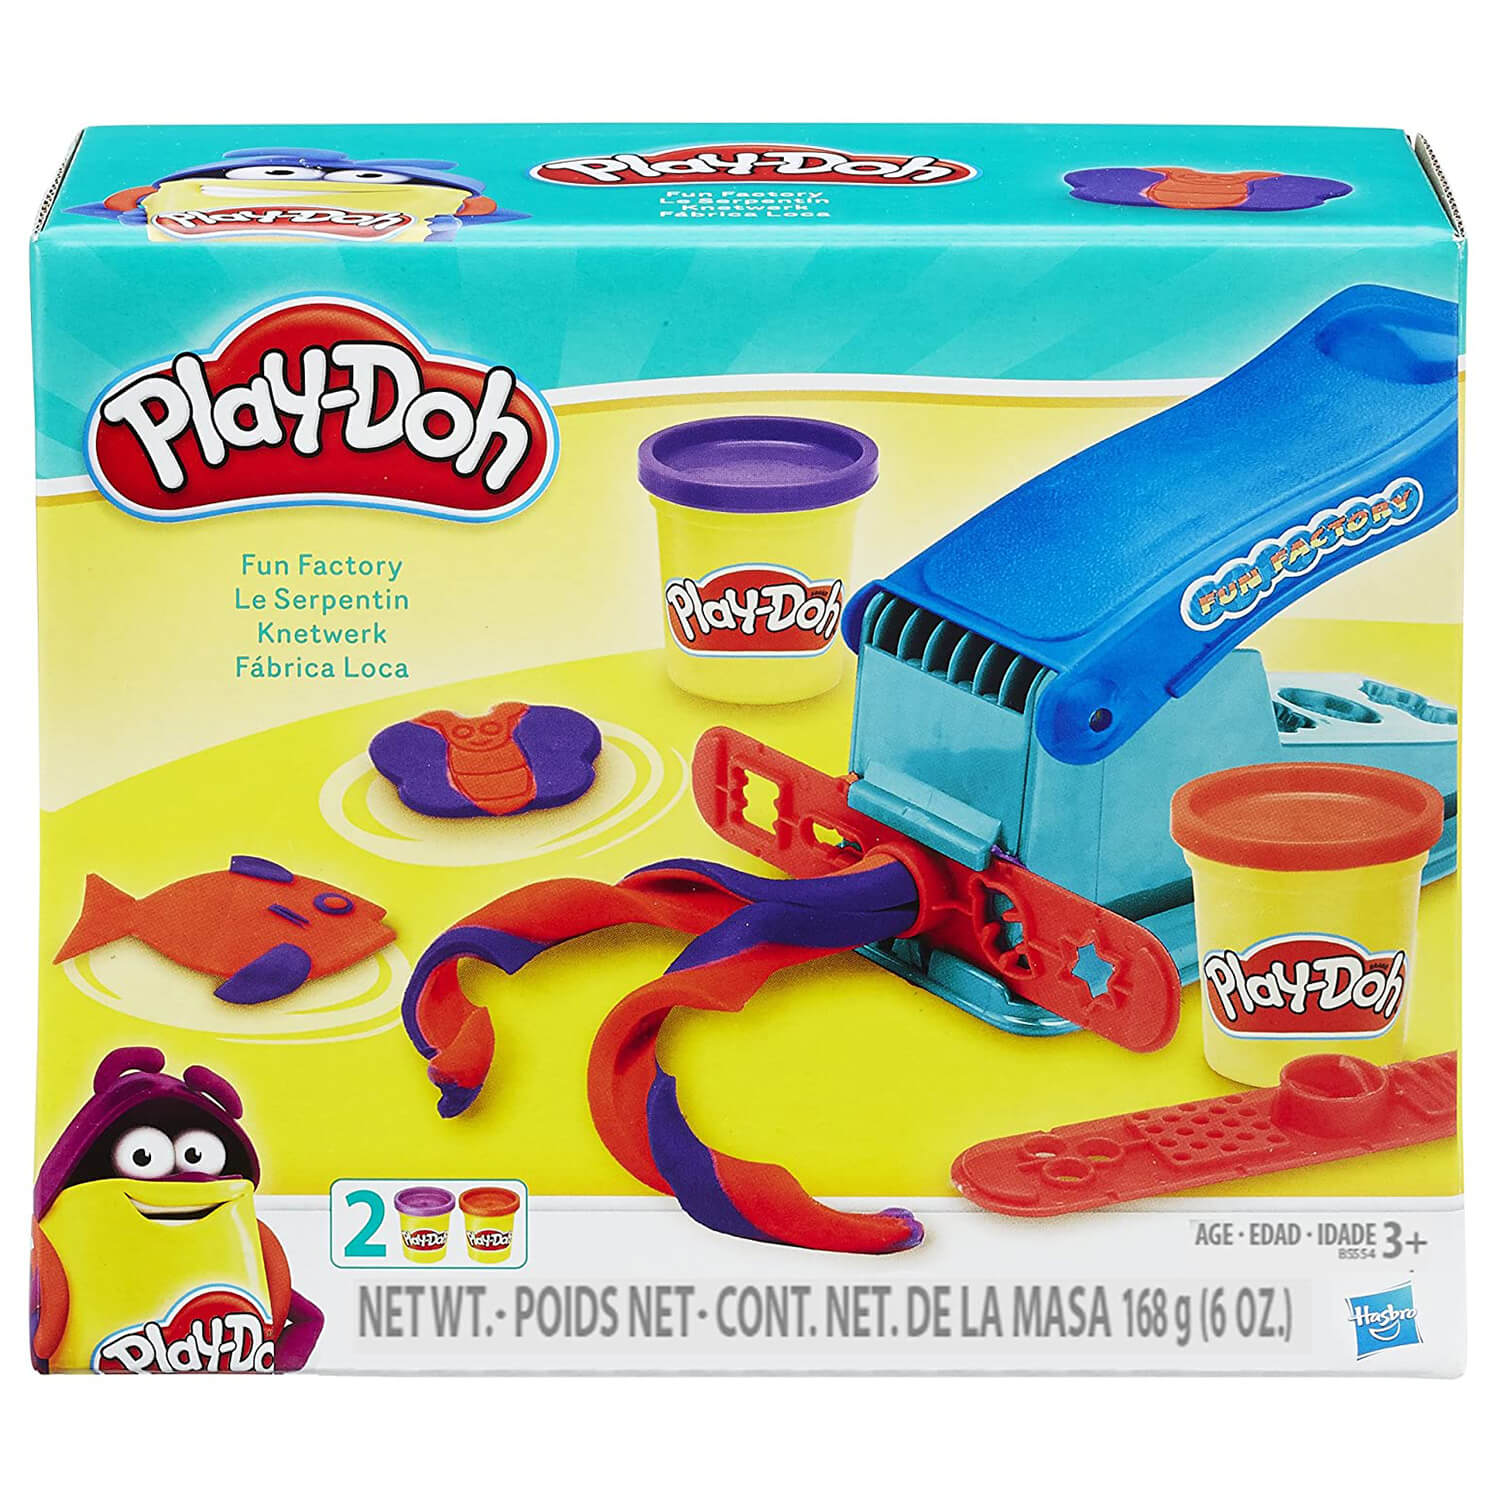 Front view of the Play-Doh Fun Factory package.